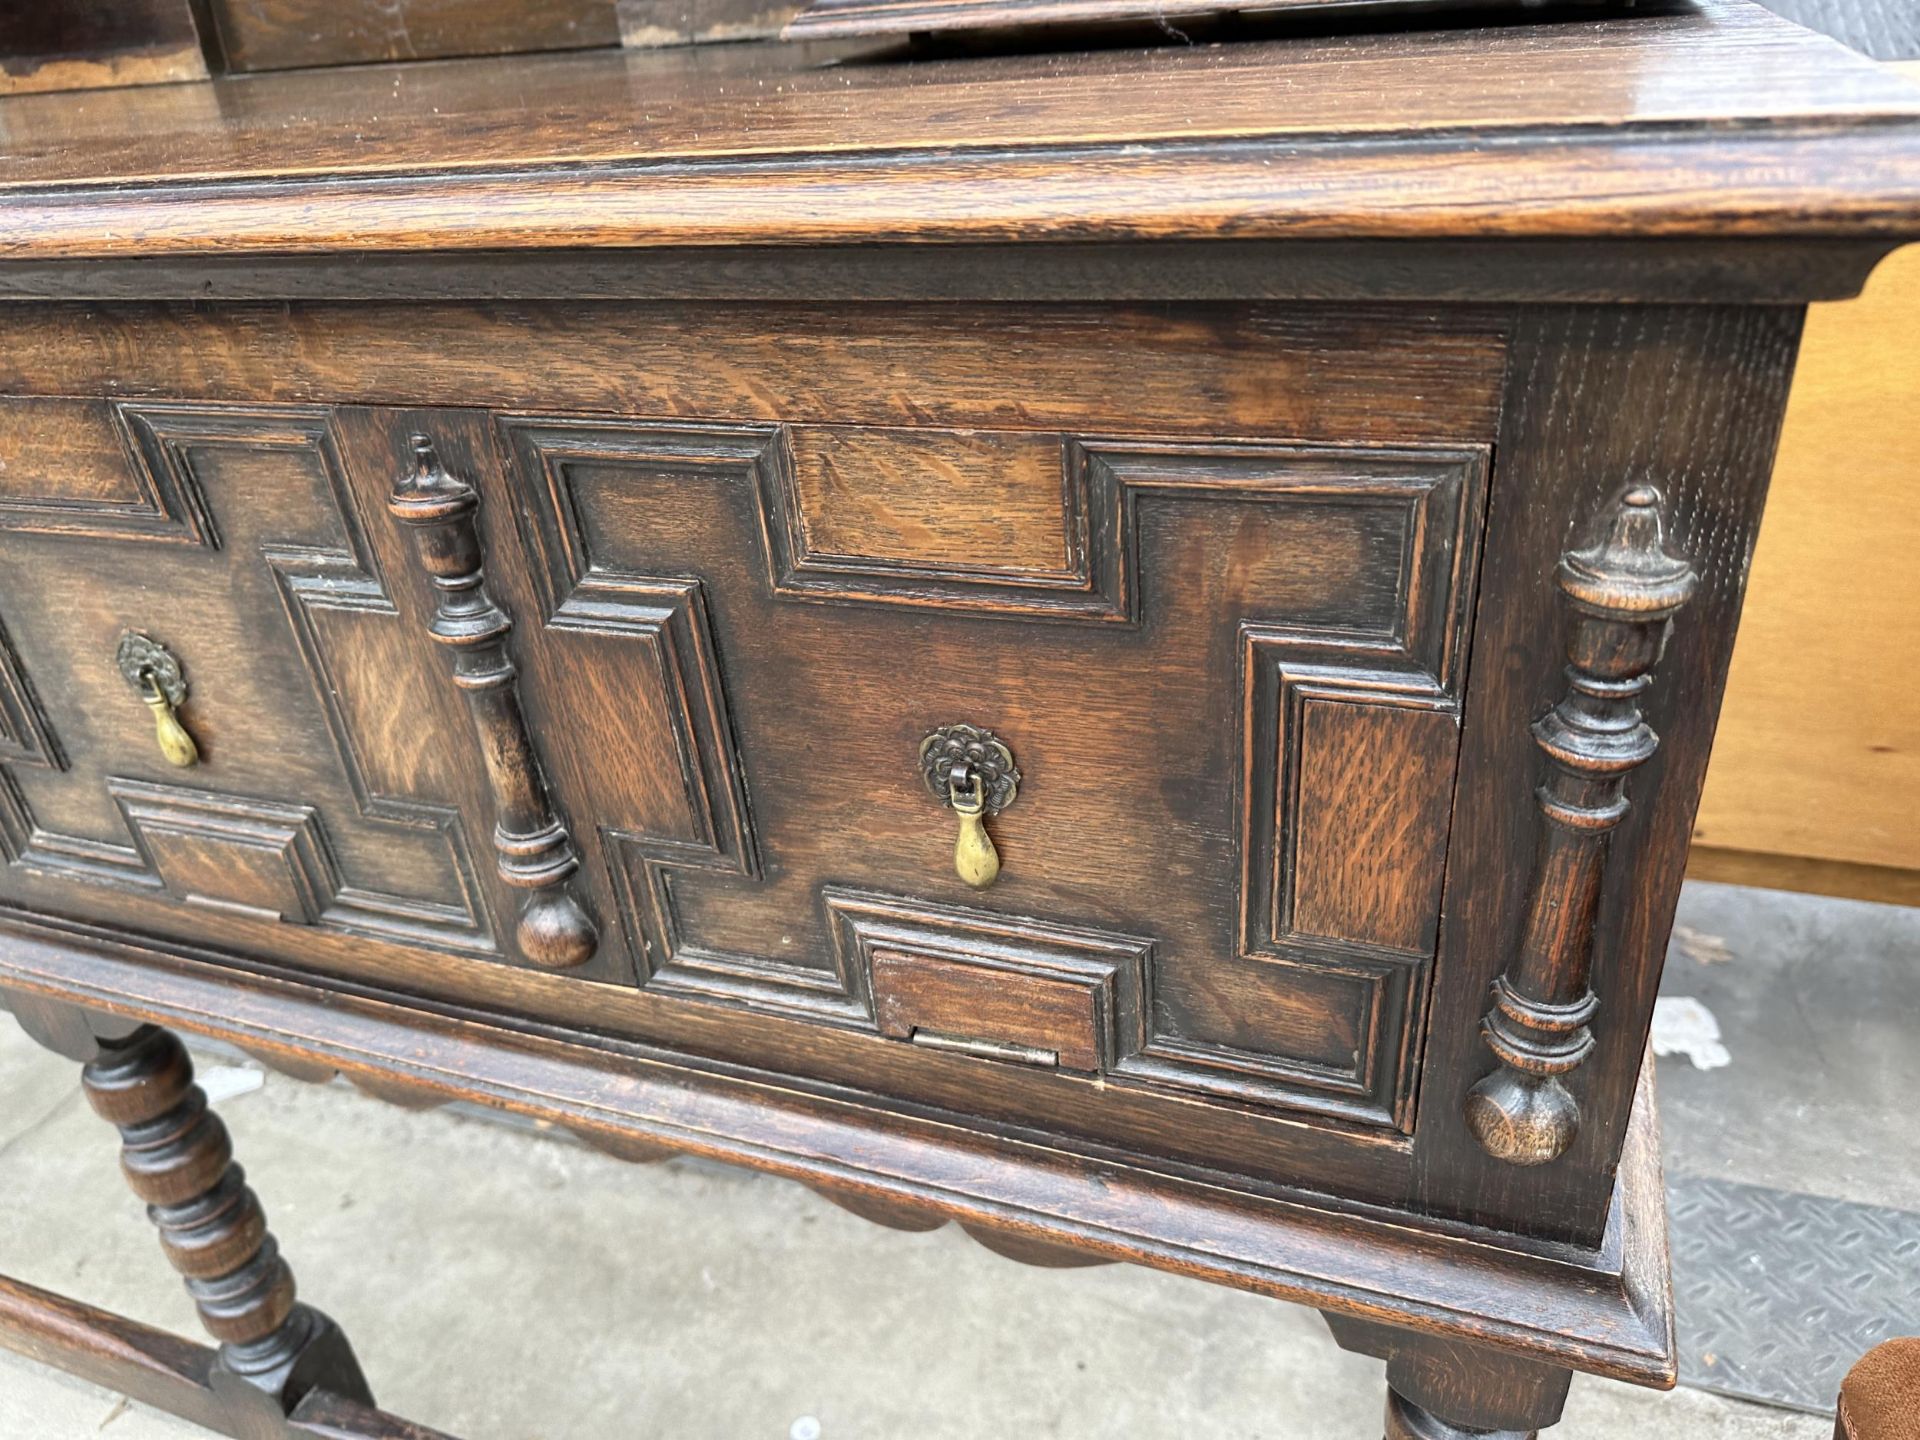 AN OAK JACOBEAN STYLE DRESSER WITH TWO FOLD-D0WN COMPARTMENTS AND A PLATE RACK ENCLOSING CUPBOARD - Image 5 of 7